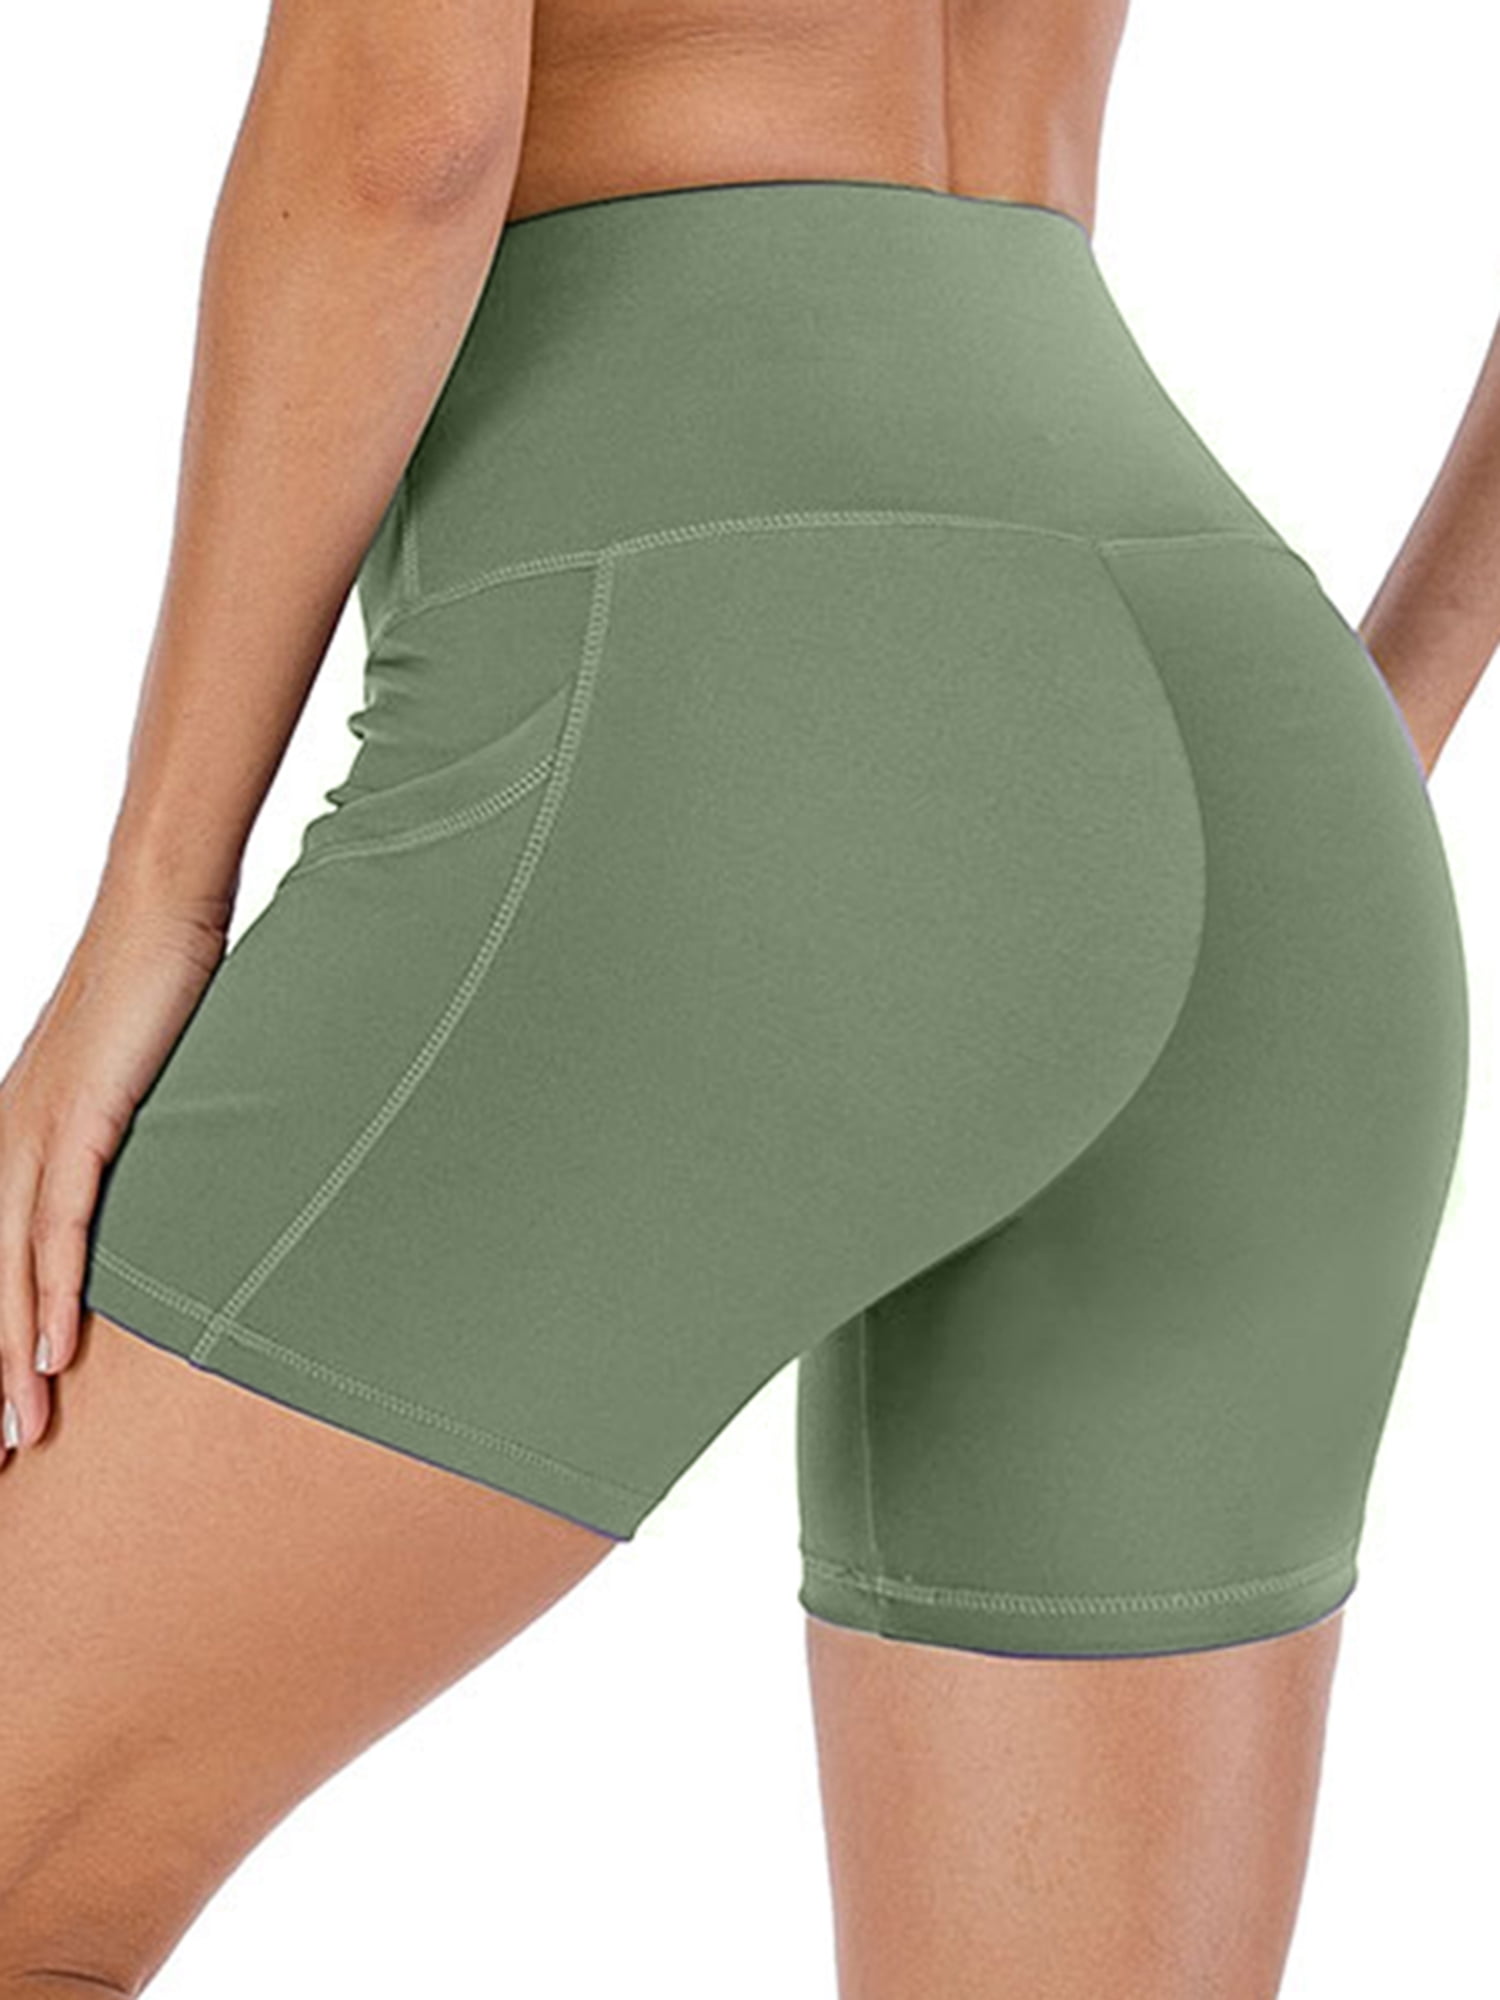 Sayfut Sayfut Women S High Waist Workout Yoga Shorts With Out Pockets Tummy Control Athletic